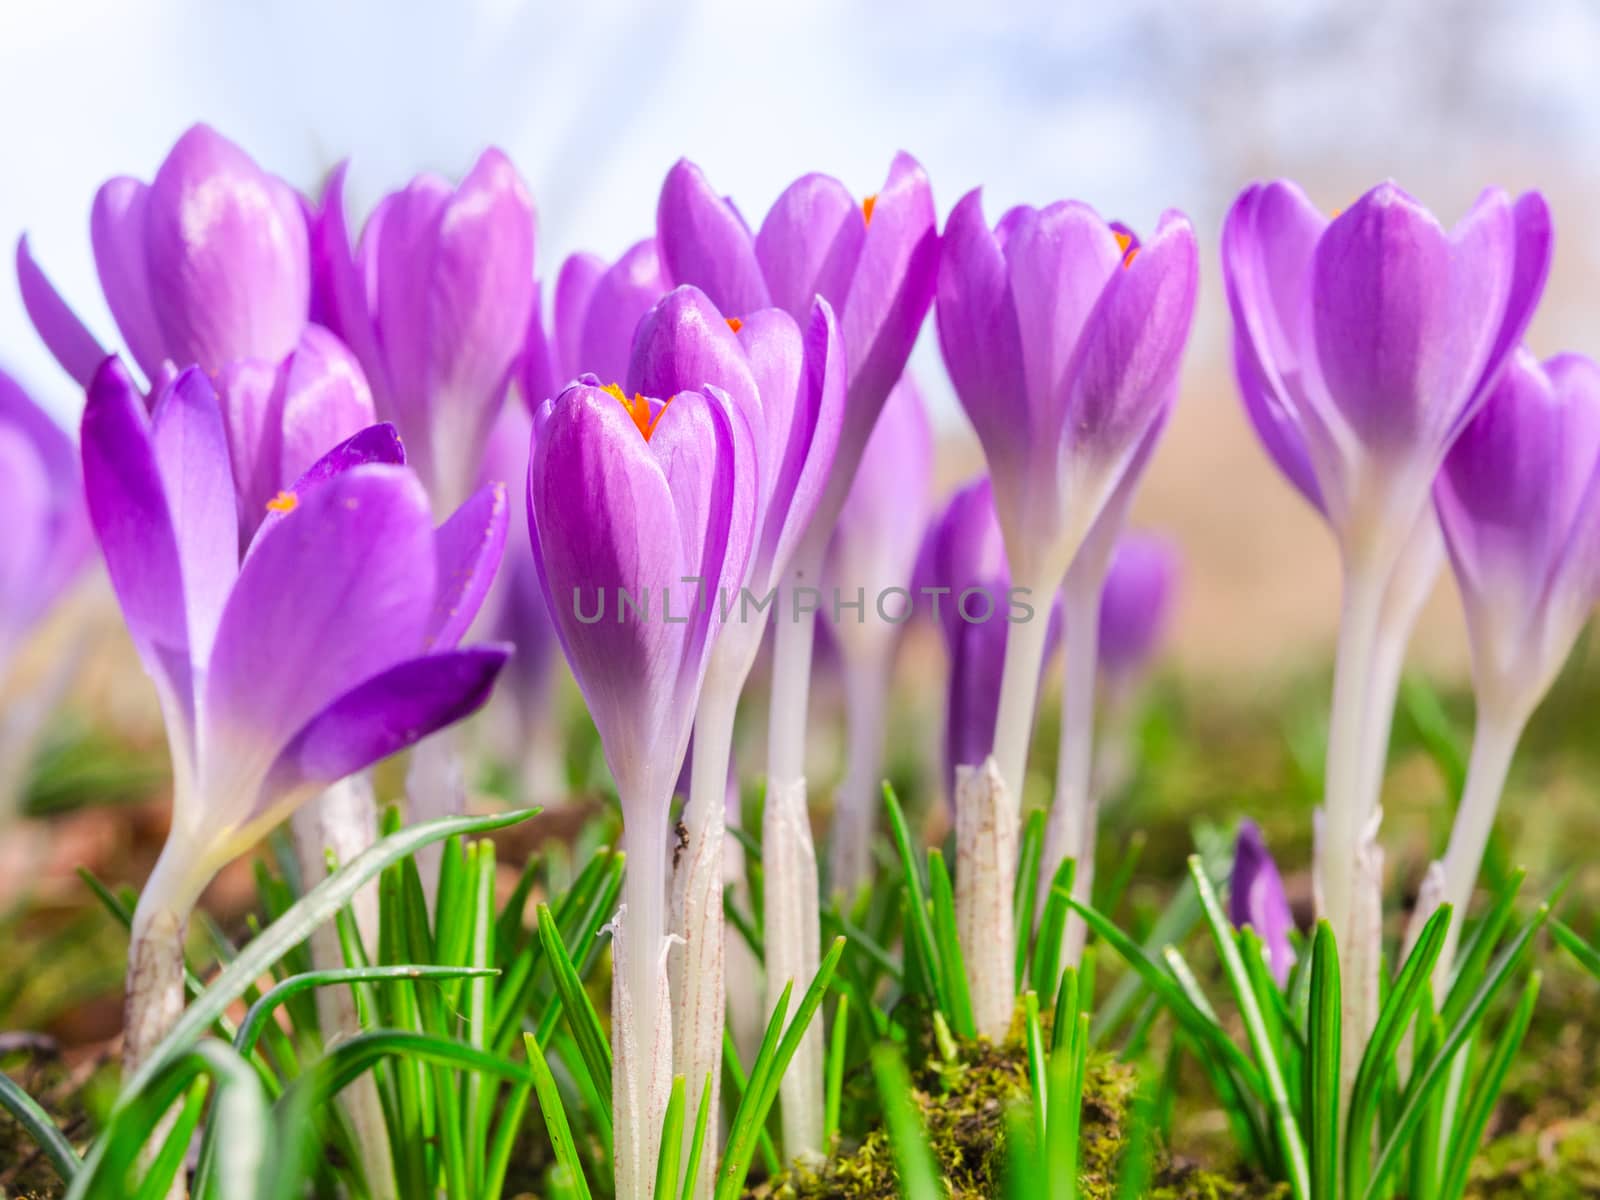 Beautiful spring blooming purple crocus flowers on Alpine sunlight meadow. Stock photo with shallow DOF and blurred background.